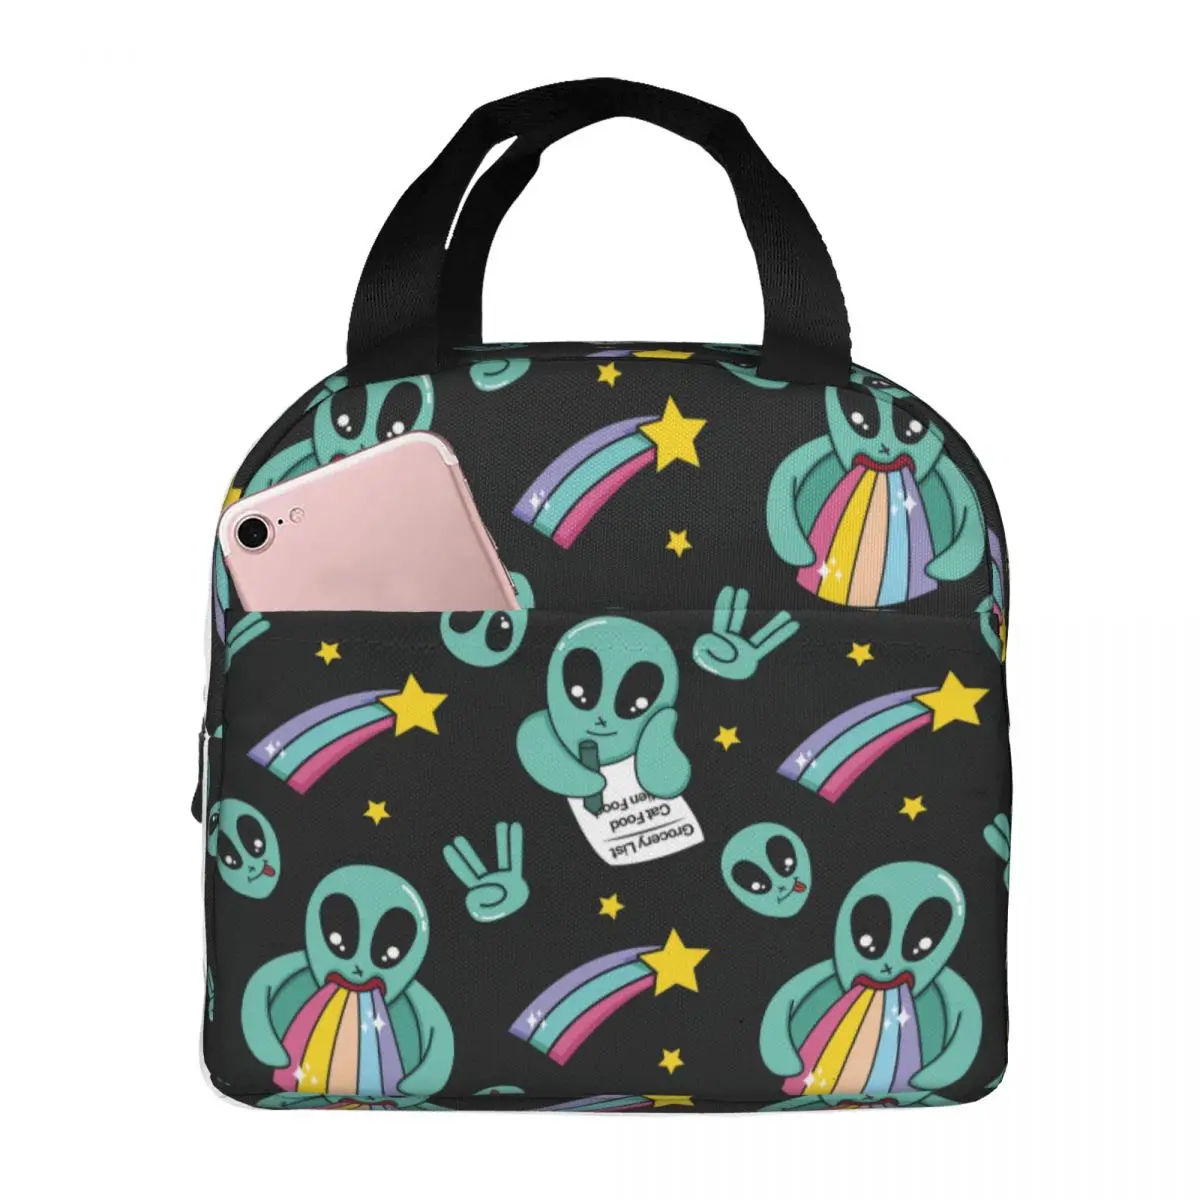 Colorful Cute Alien And Rainbow Lunch Bags Waterproof Insulated Cooler Bags Thermal Cold Food Picnic Lunch Box for Women Kids